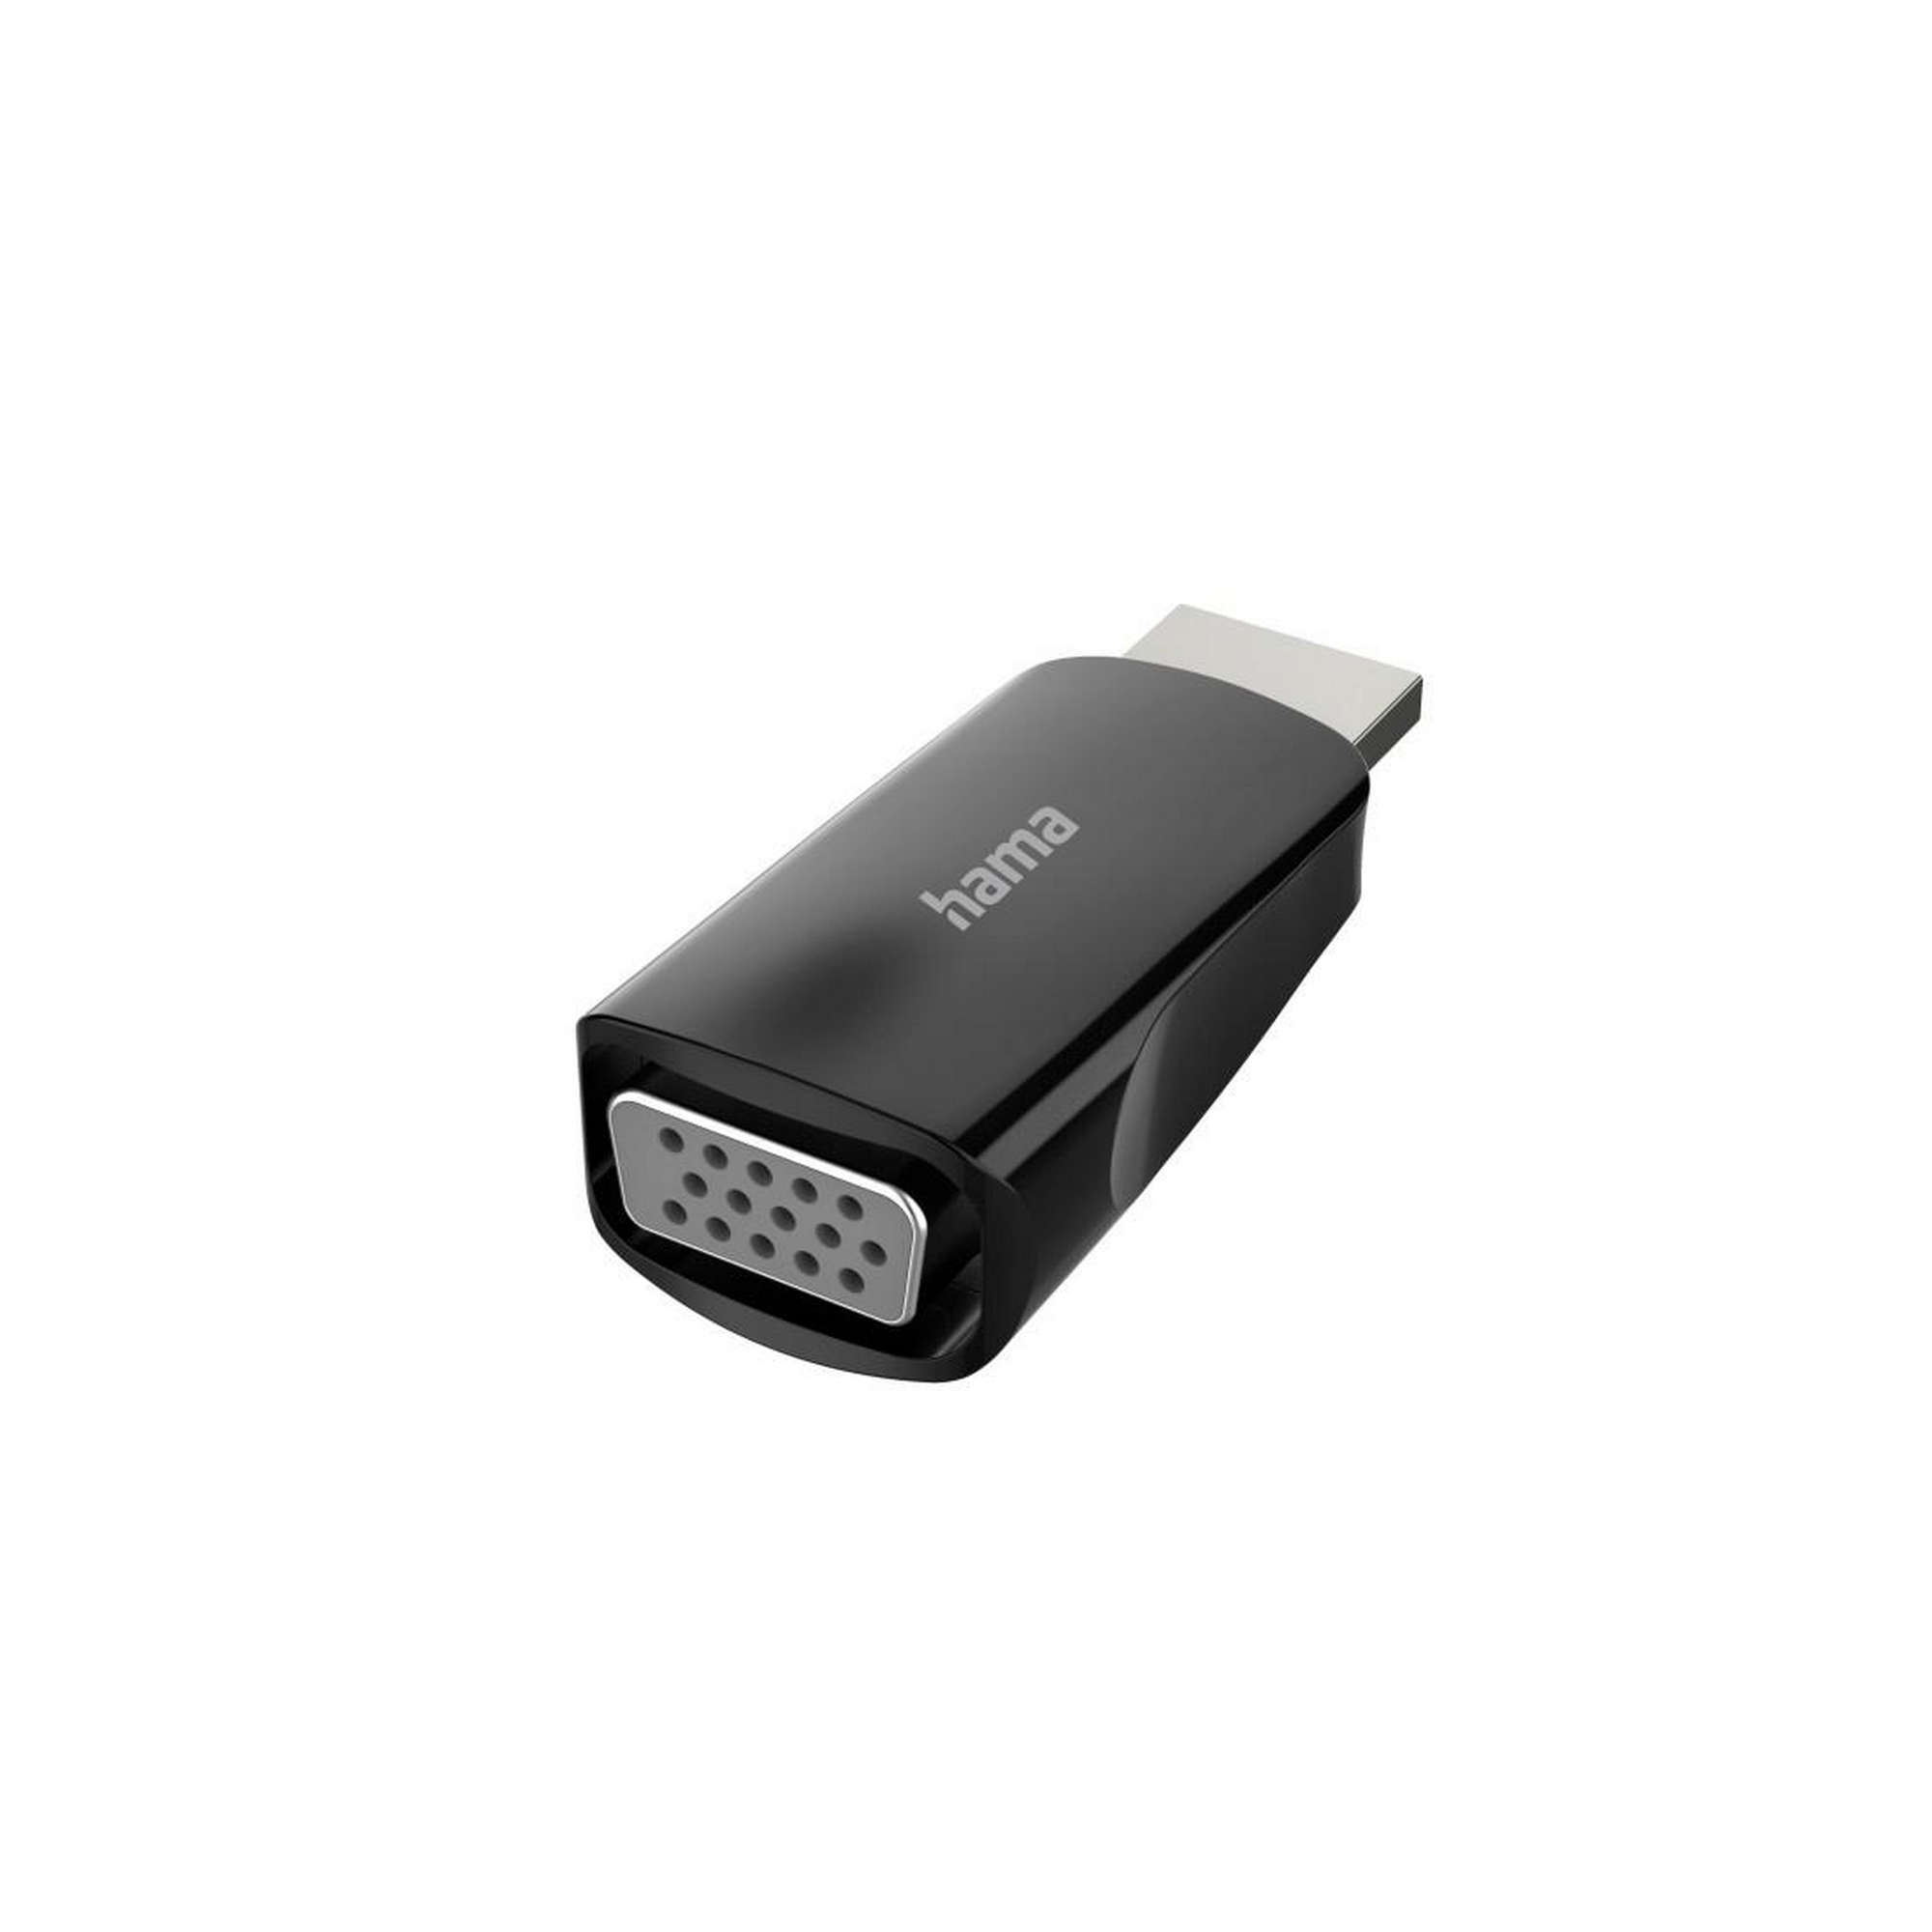 Video-Adapter HDMI-Stecker mit VGA-Buchse, Full-HD 1080p + product picture